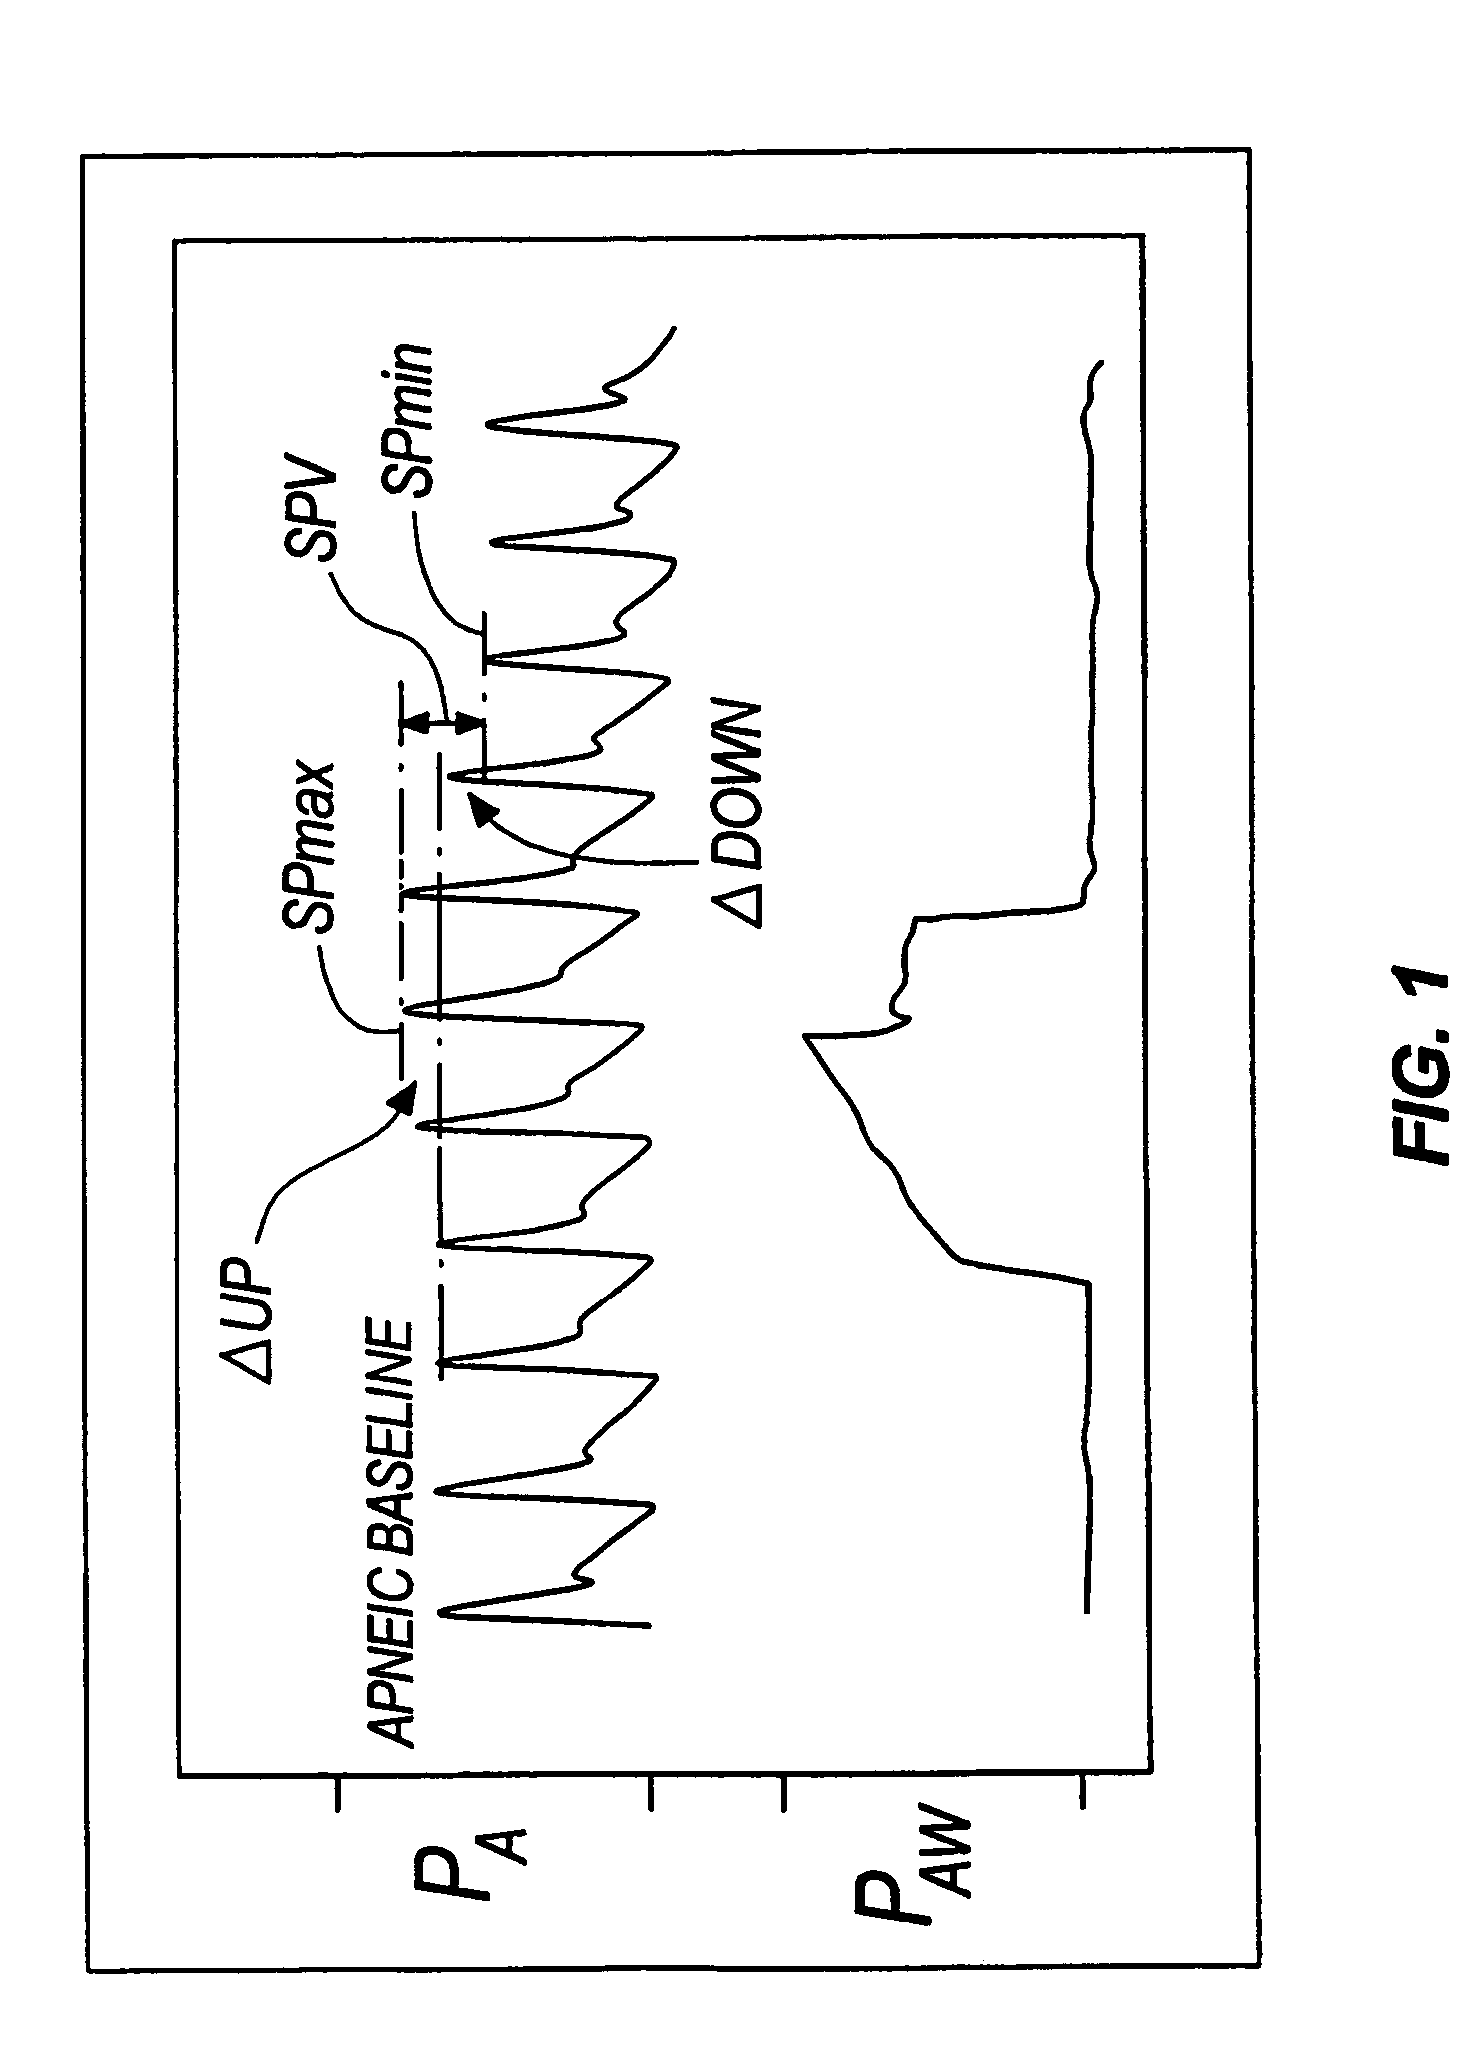 System and method of monitoring systolic pressure variation